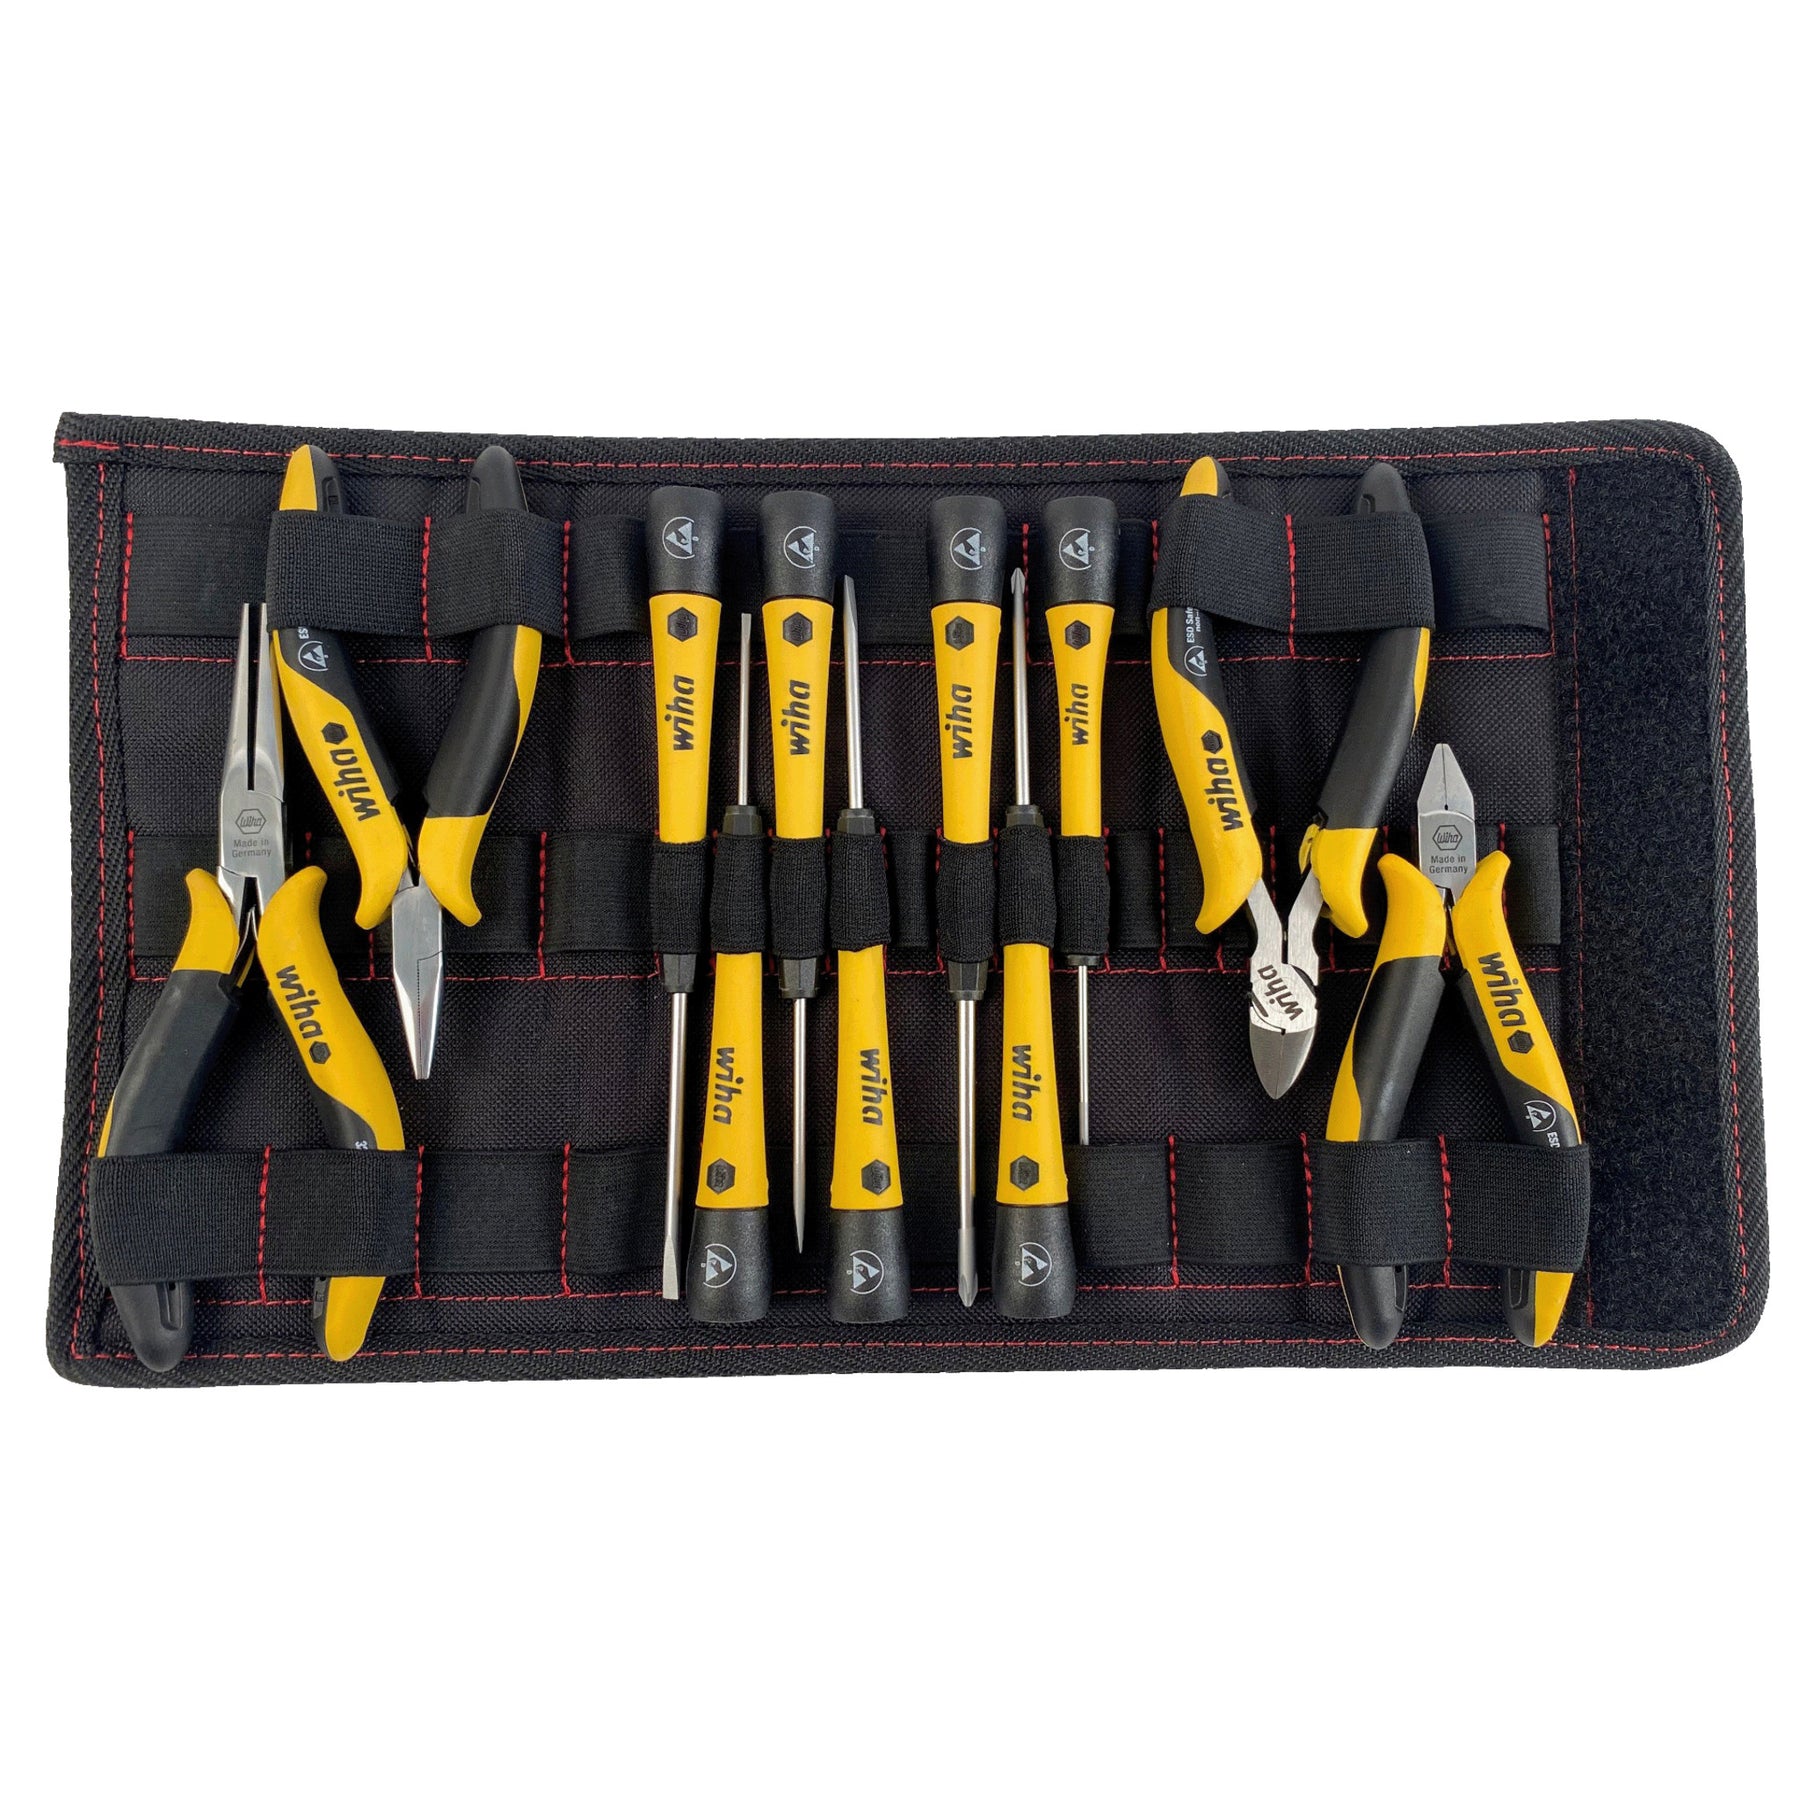 Wiha 32794 11 Piece ESD Safe PicoFinish Precision Screwdrivers and Pliers Set in Pouch